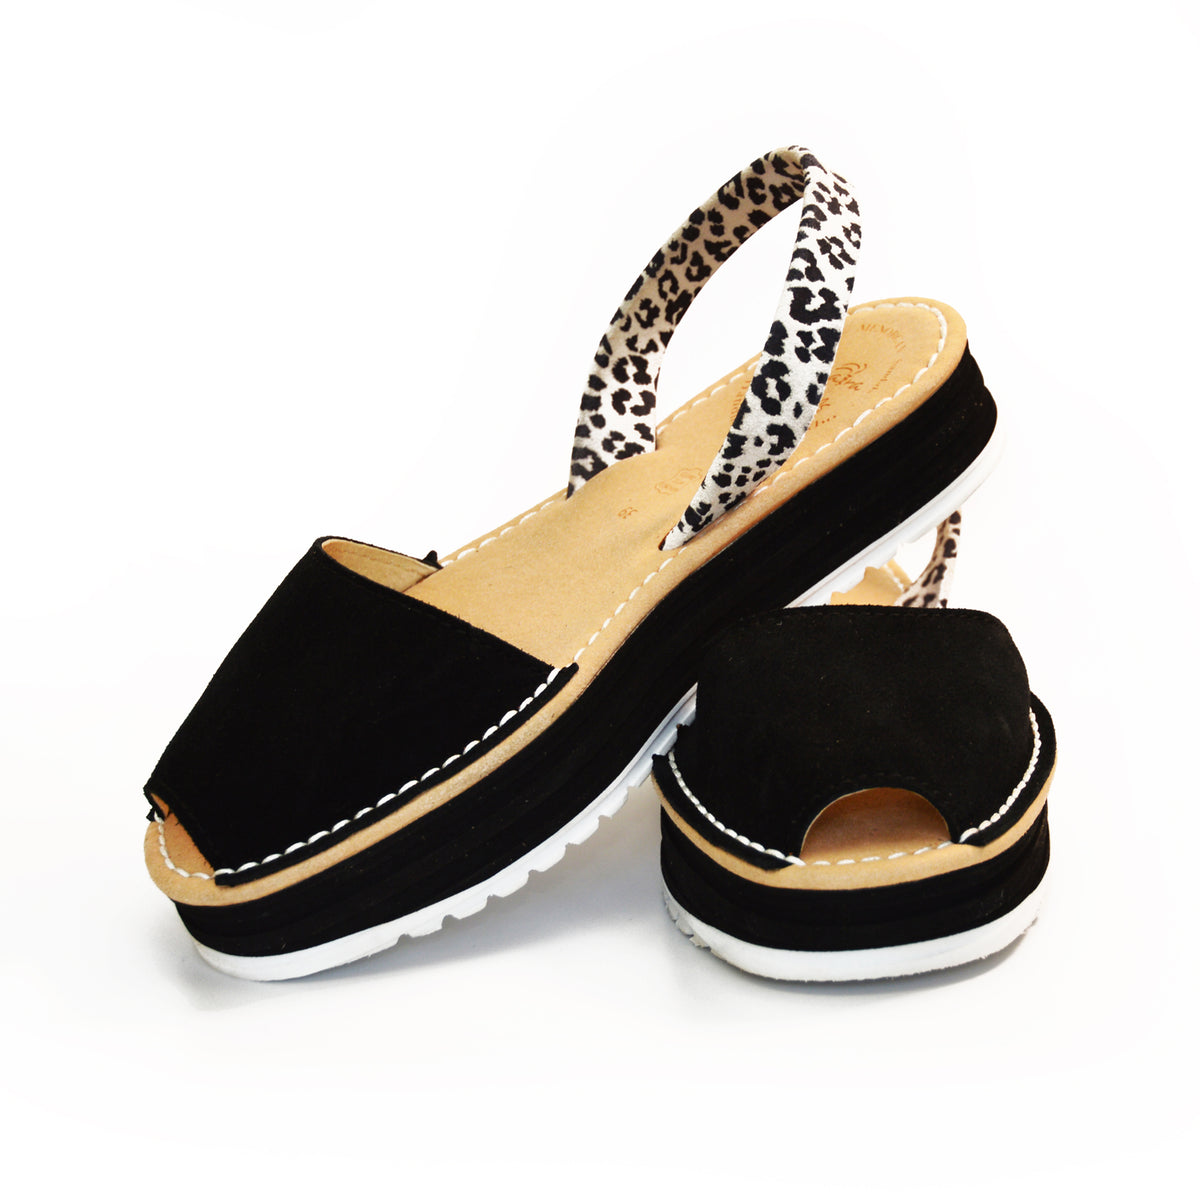 black and white sporty lowforms spanish avarcas sandals